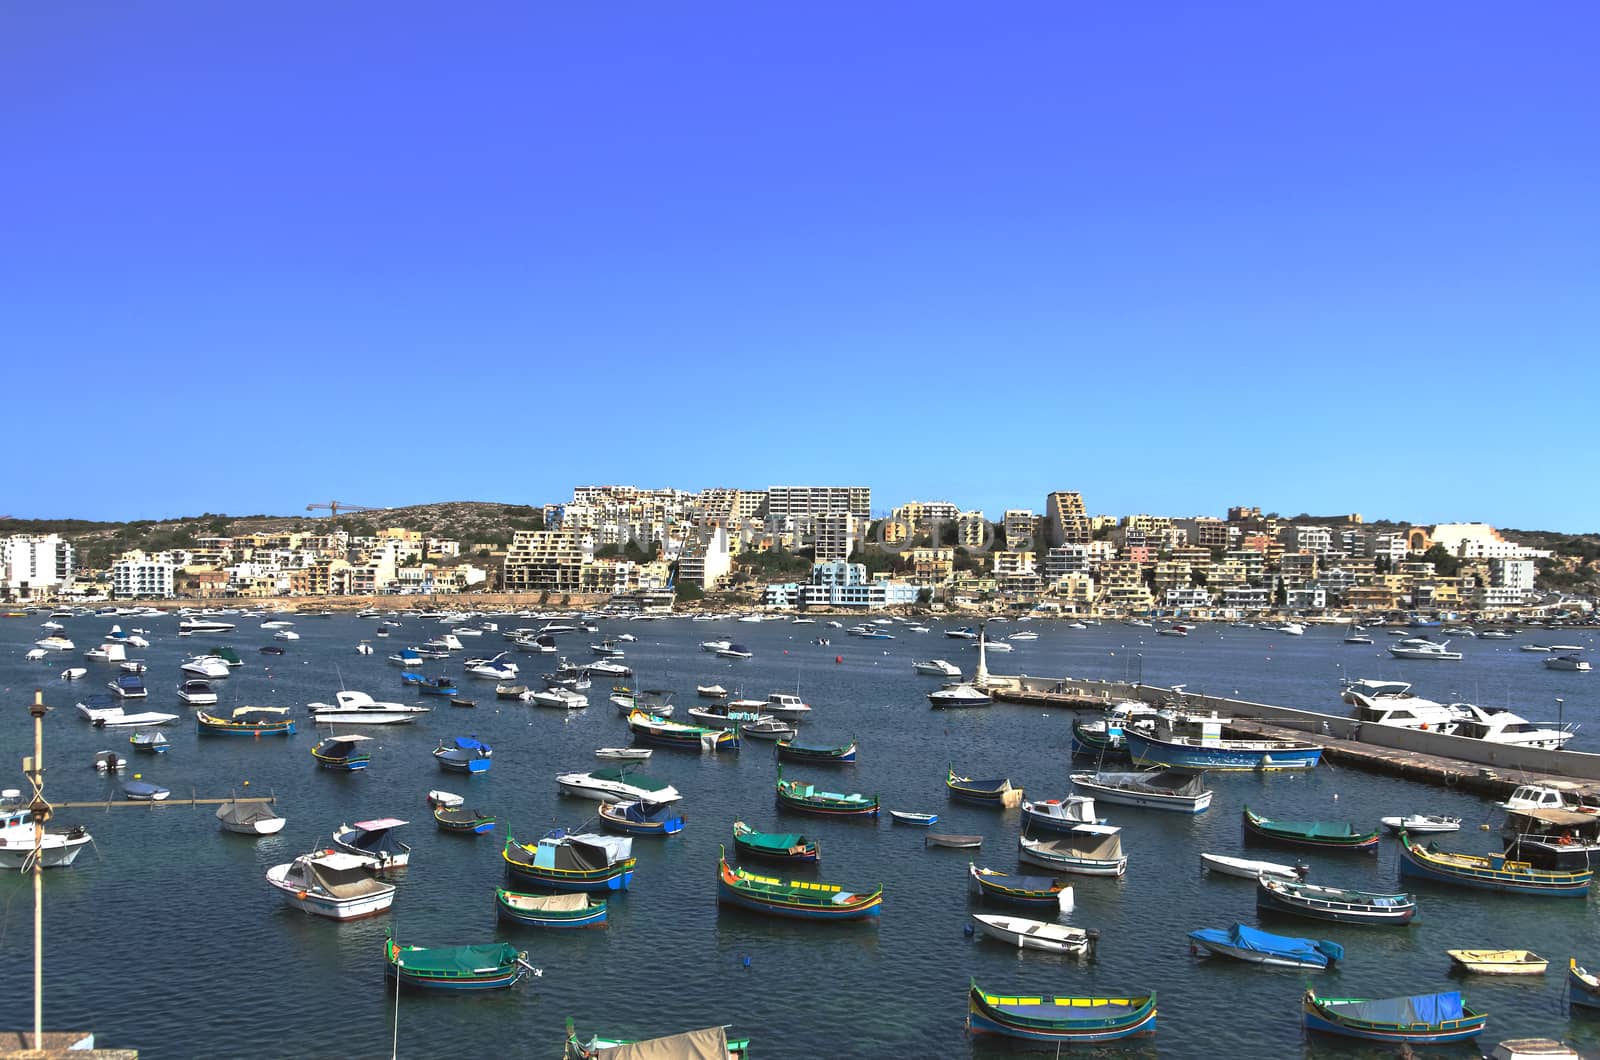 Fishing harbour in the St Paul's Bay and panorama of Xemxija in the background - San Pawl il-Baħar, Malta